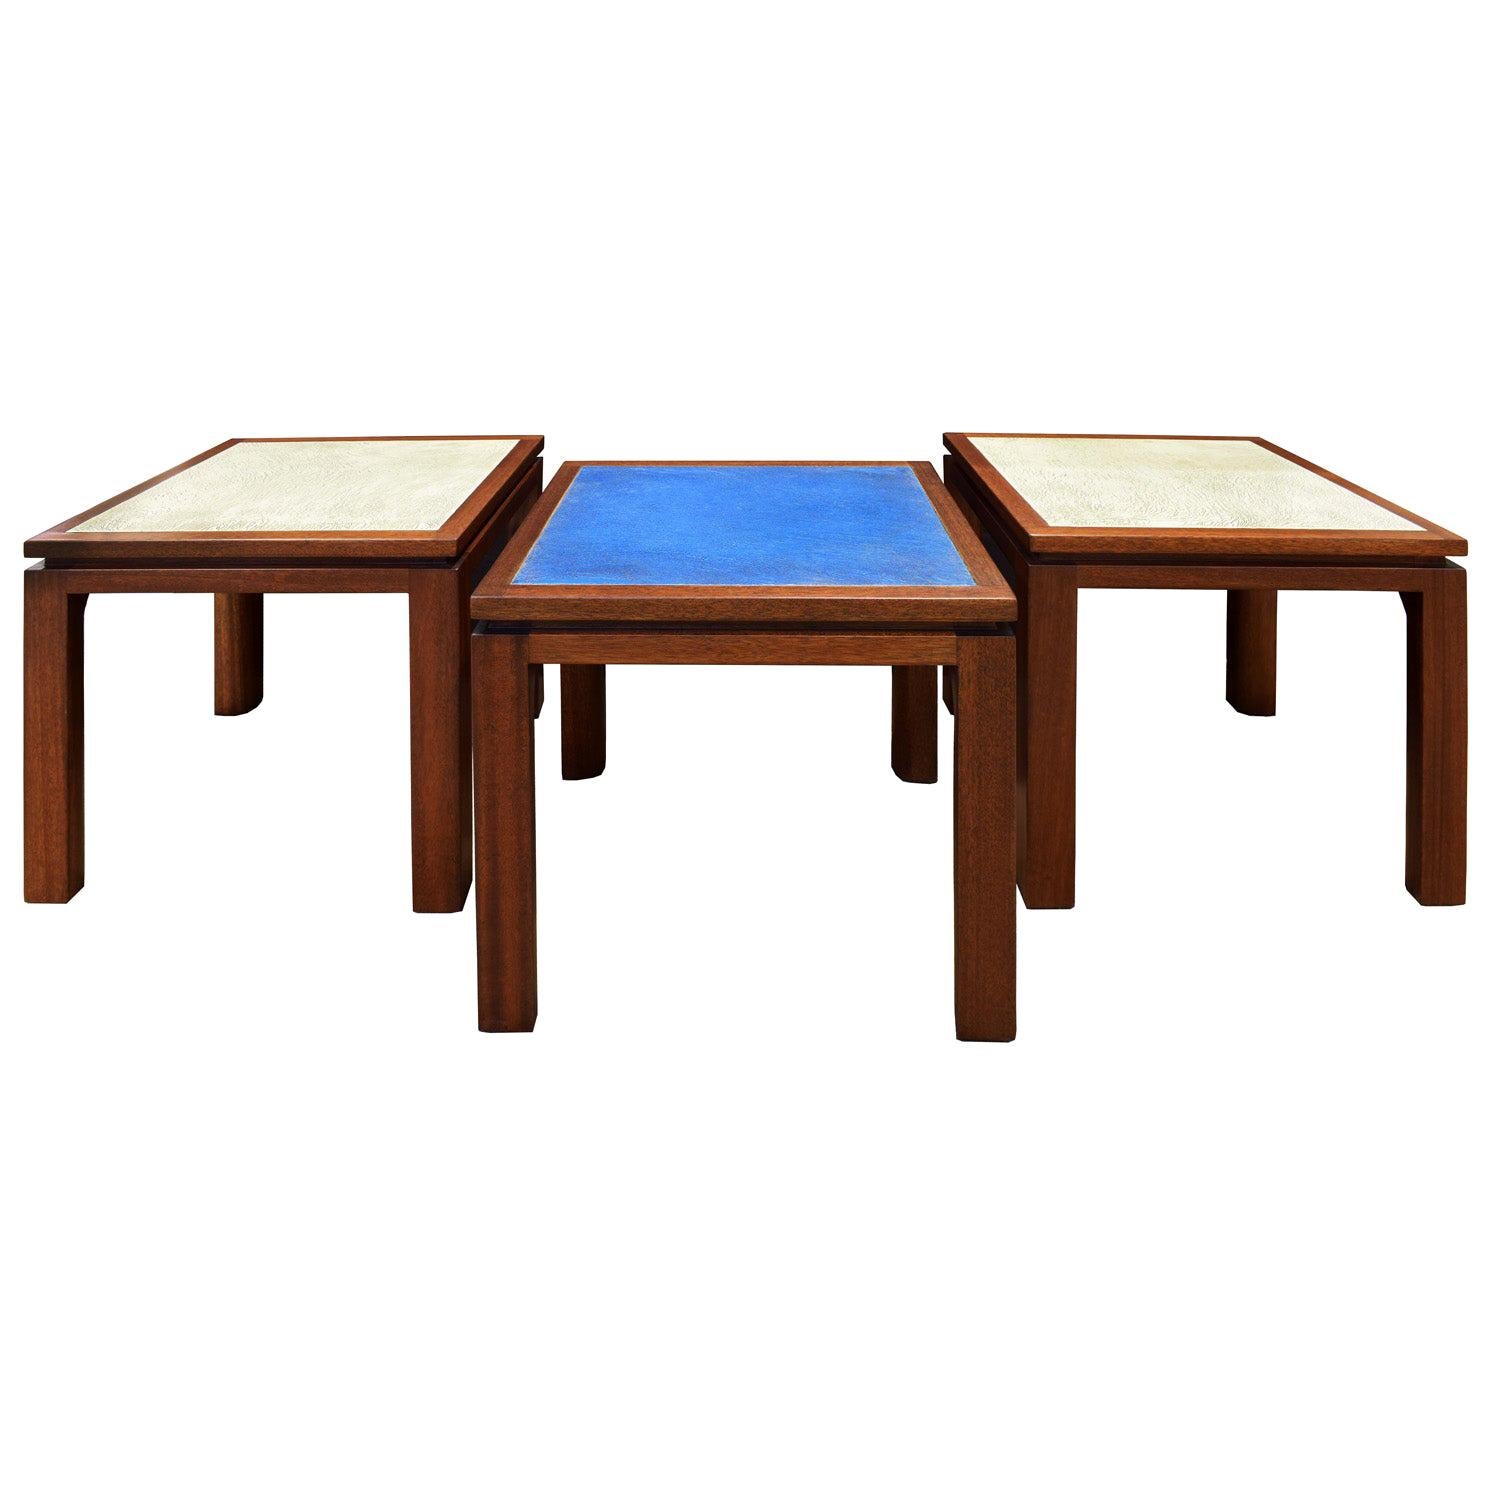 Harvey Probber Set of 3 Tables with "Enamel on Copper" Tops, 1950s